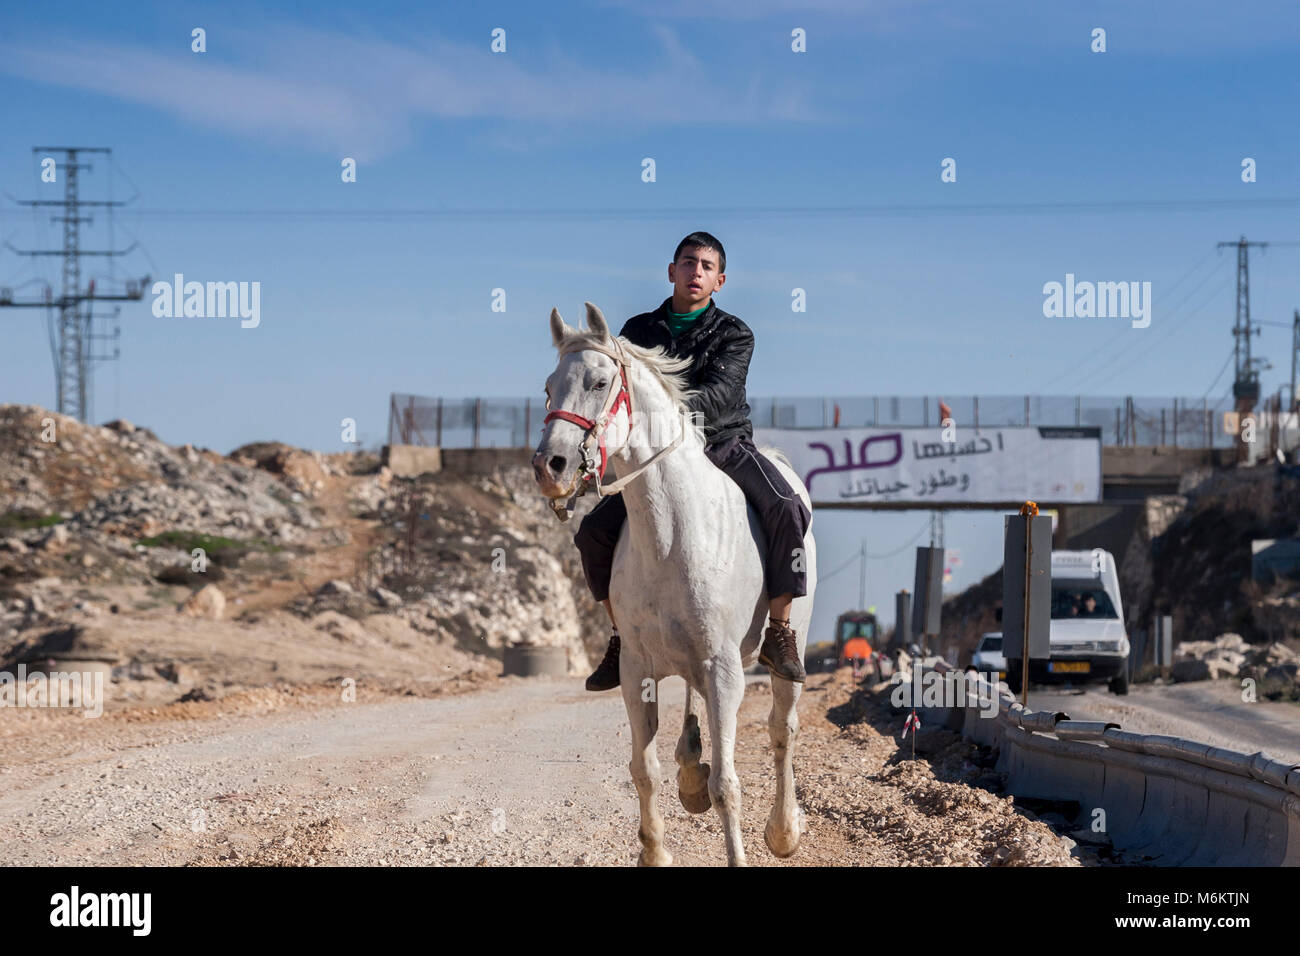 Ram, Palestine, January 12, 2011: A boy is riding a horse by a road in the messy countryside of Palestine Stock Photo